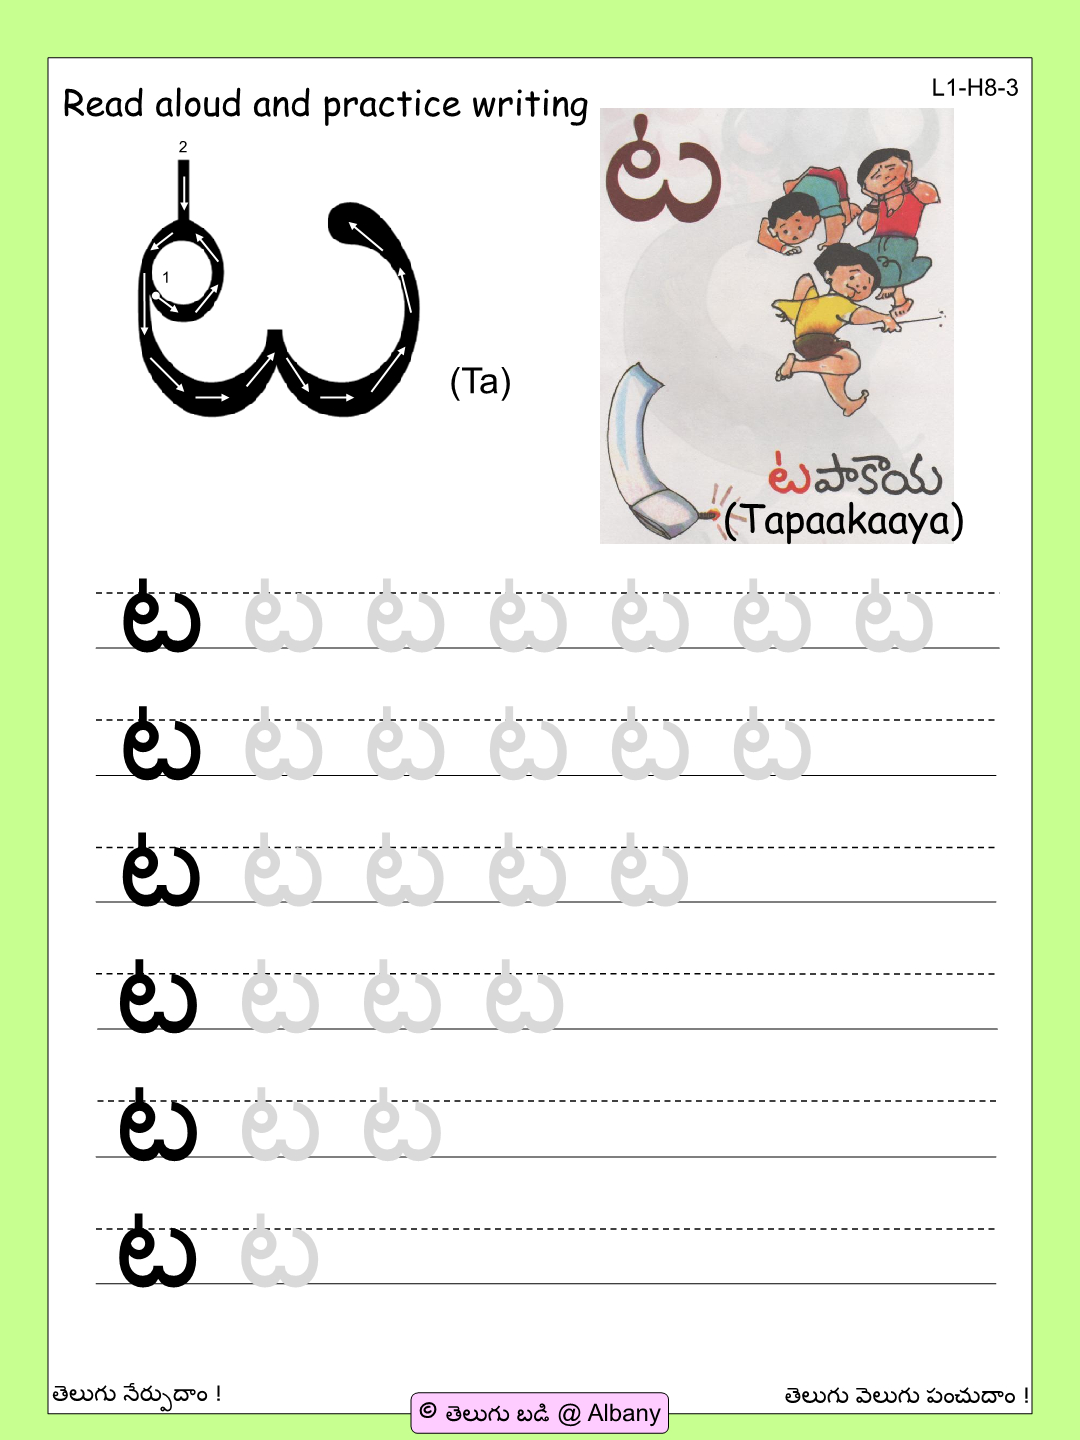 Telugu Picture Reading Video Lesson &quot;aata (ఆట)&quot; with regard to Telugu Letters Tracing